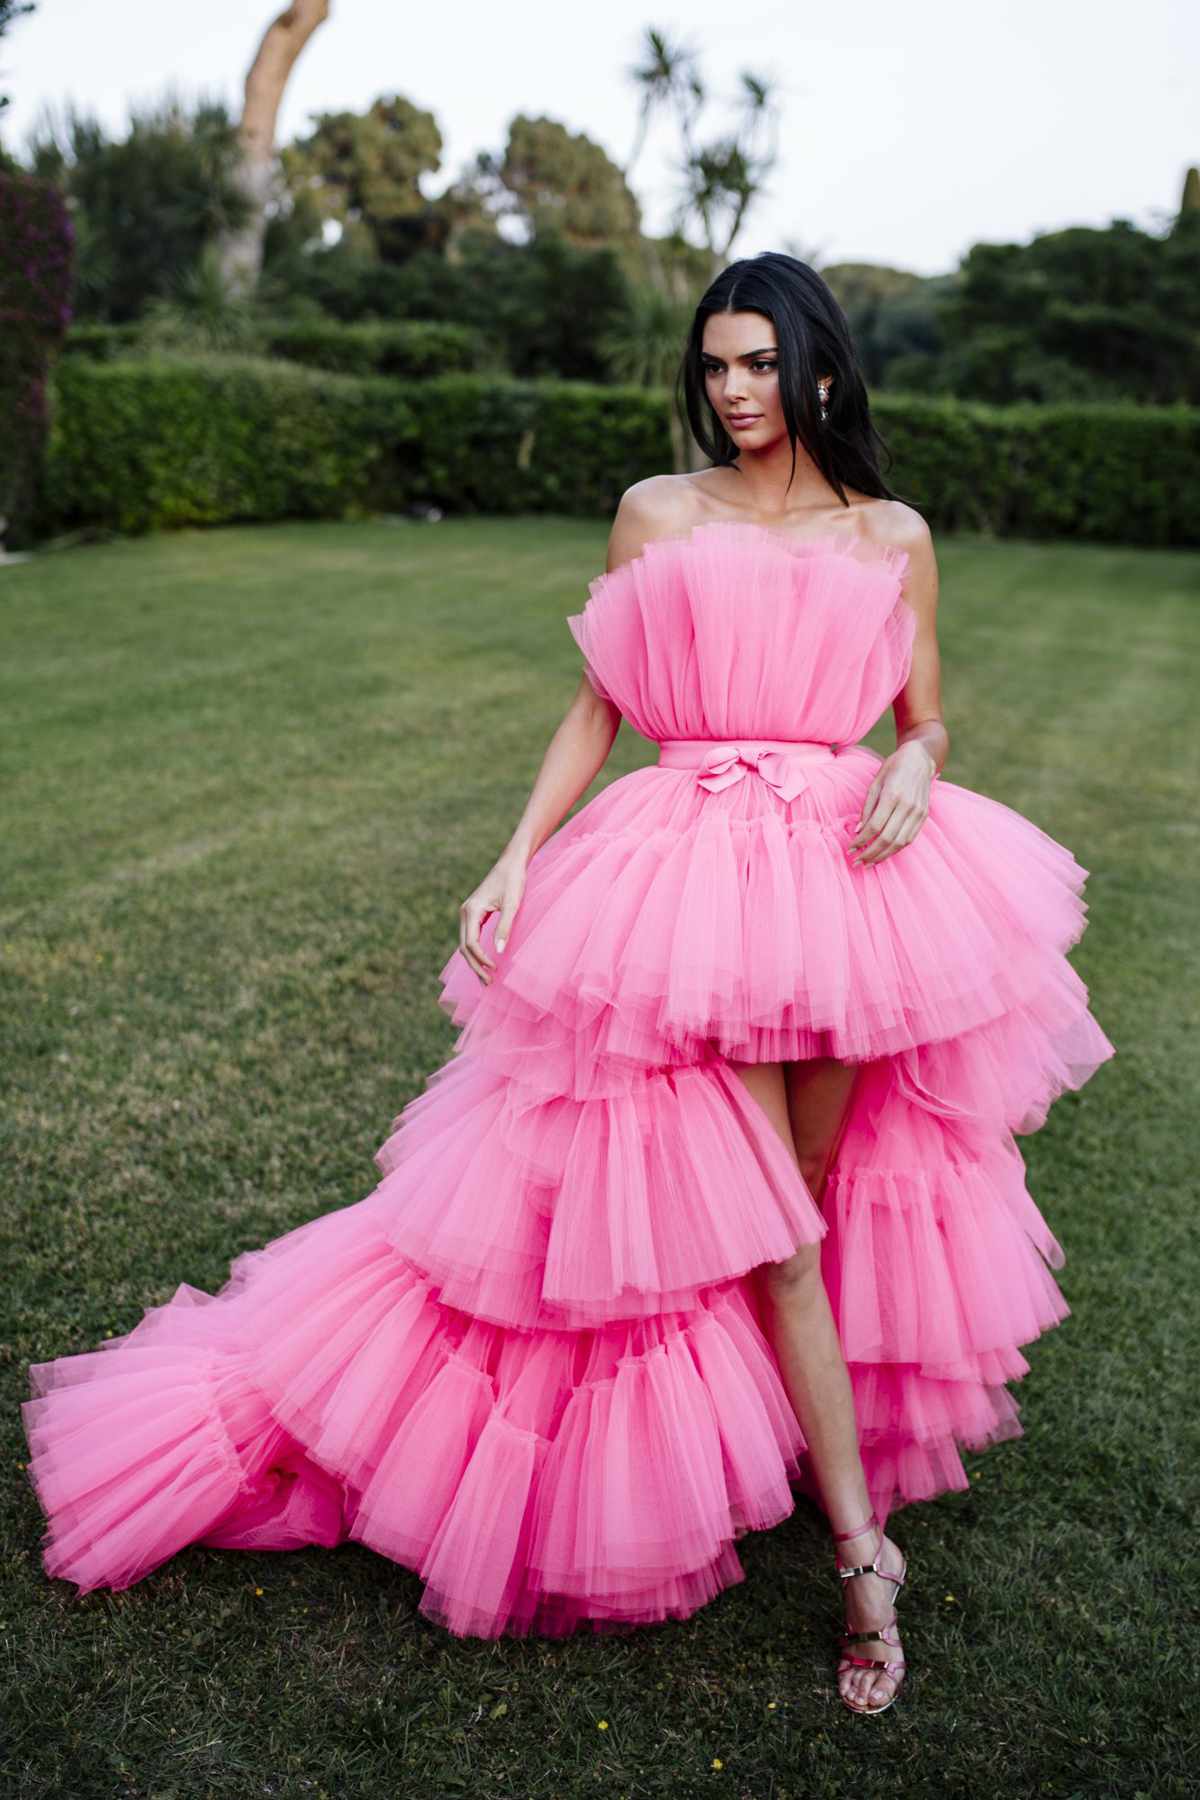 <p>A vision in pink! Kendall Jenner attended the 2019 amfAR Cannes Gala in this dreamy pink Giambattista Valli. The strapless gown draped layers and layers of tulle and cinched at the waist with an adorable bow --  a dress fit for a princess. Jenner exuded regality while roaming Hotel du Cap-Eden-Roc. Her dark brown hair delightfully contrasted the bright shade of the dress, while her rose mirrored sandals accented it. </p>
                            